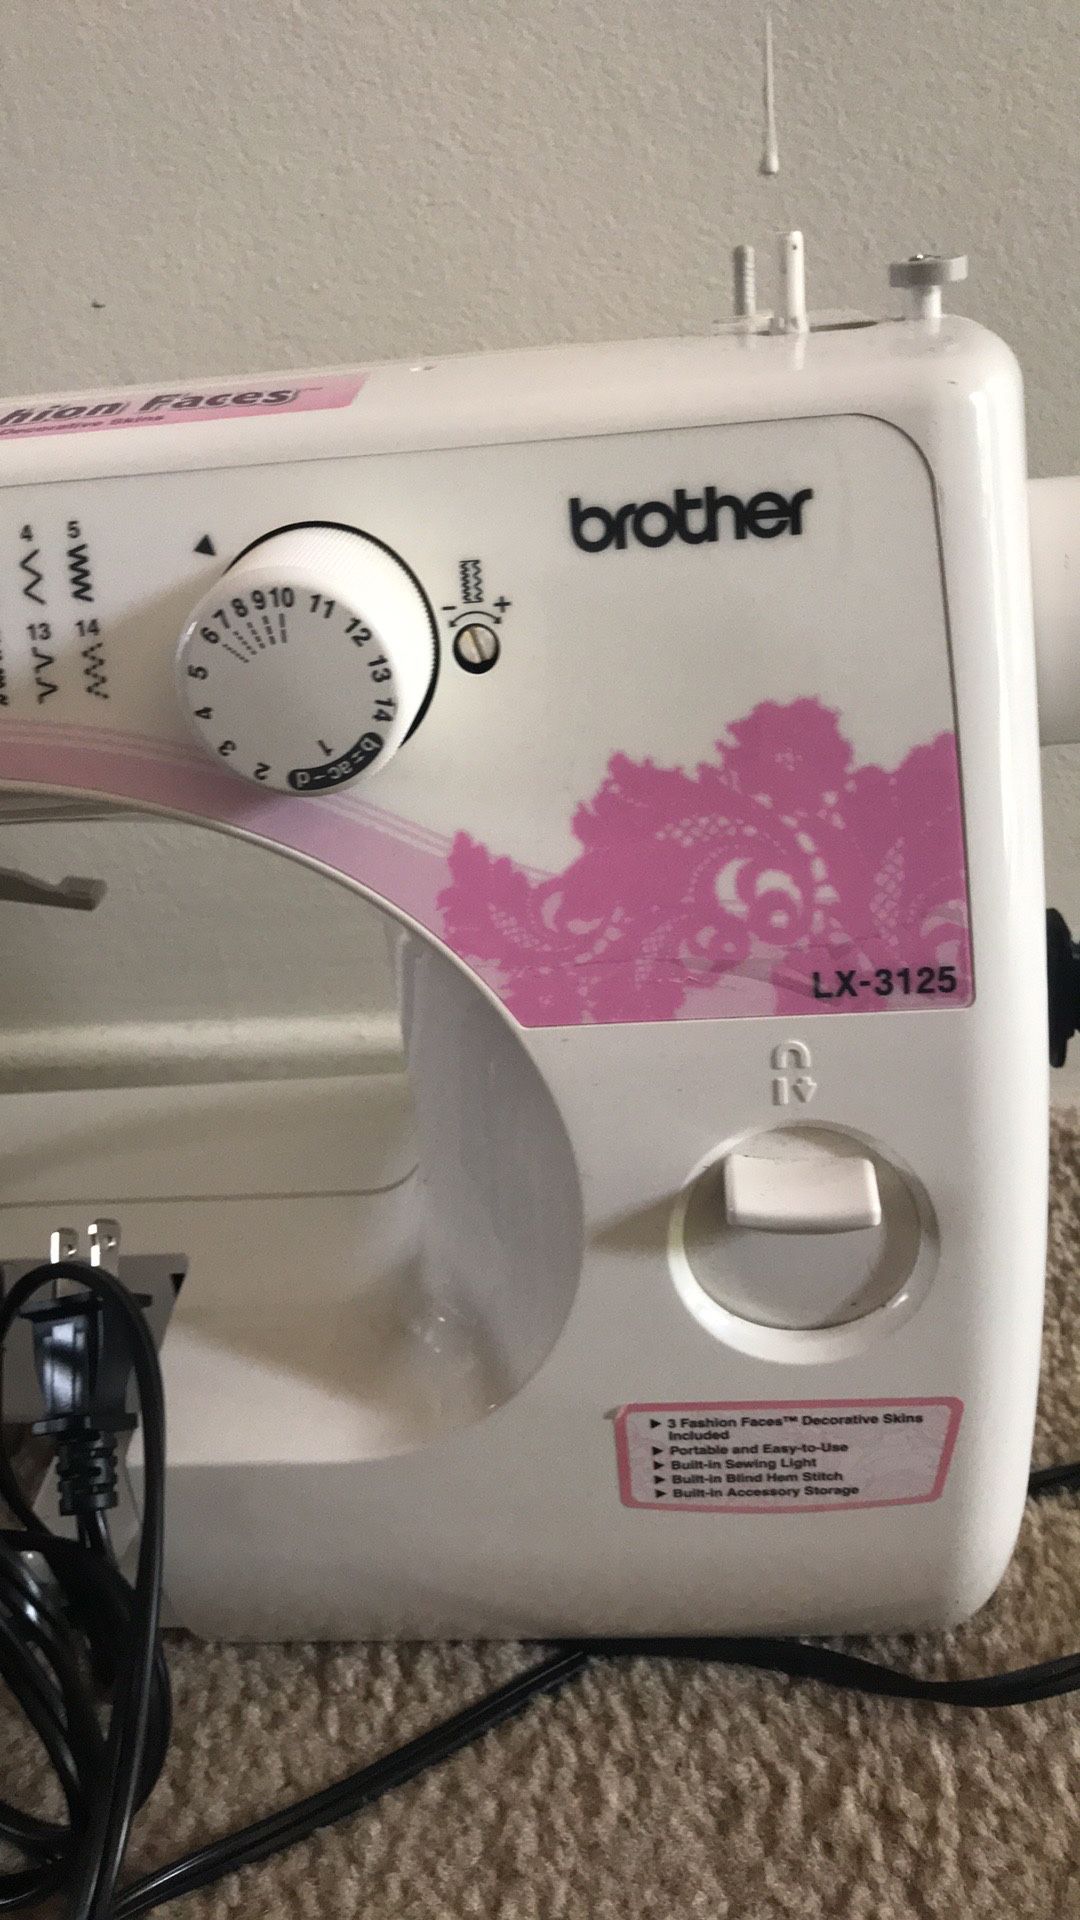 Brother sewing machine LX- 3125